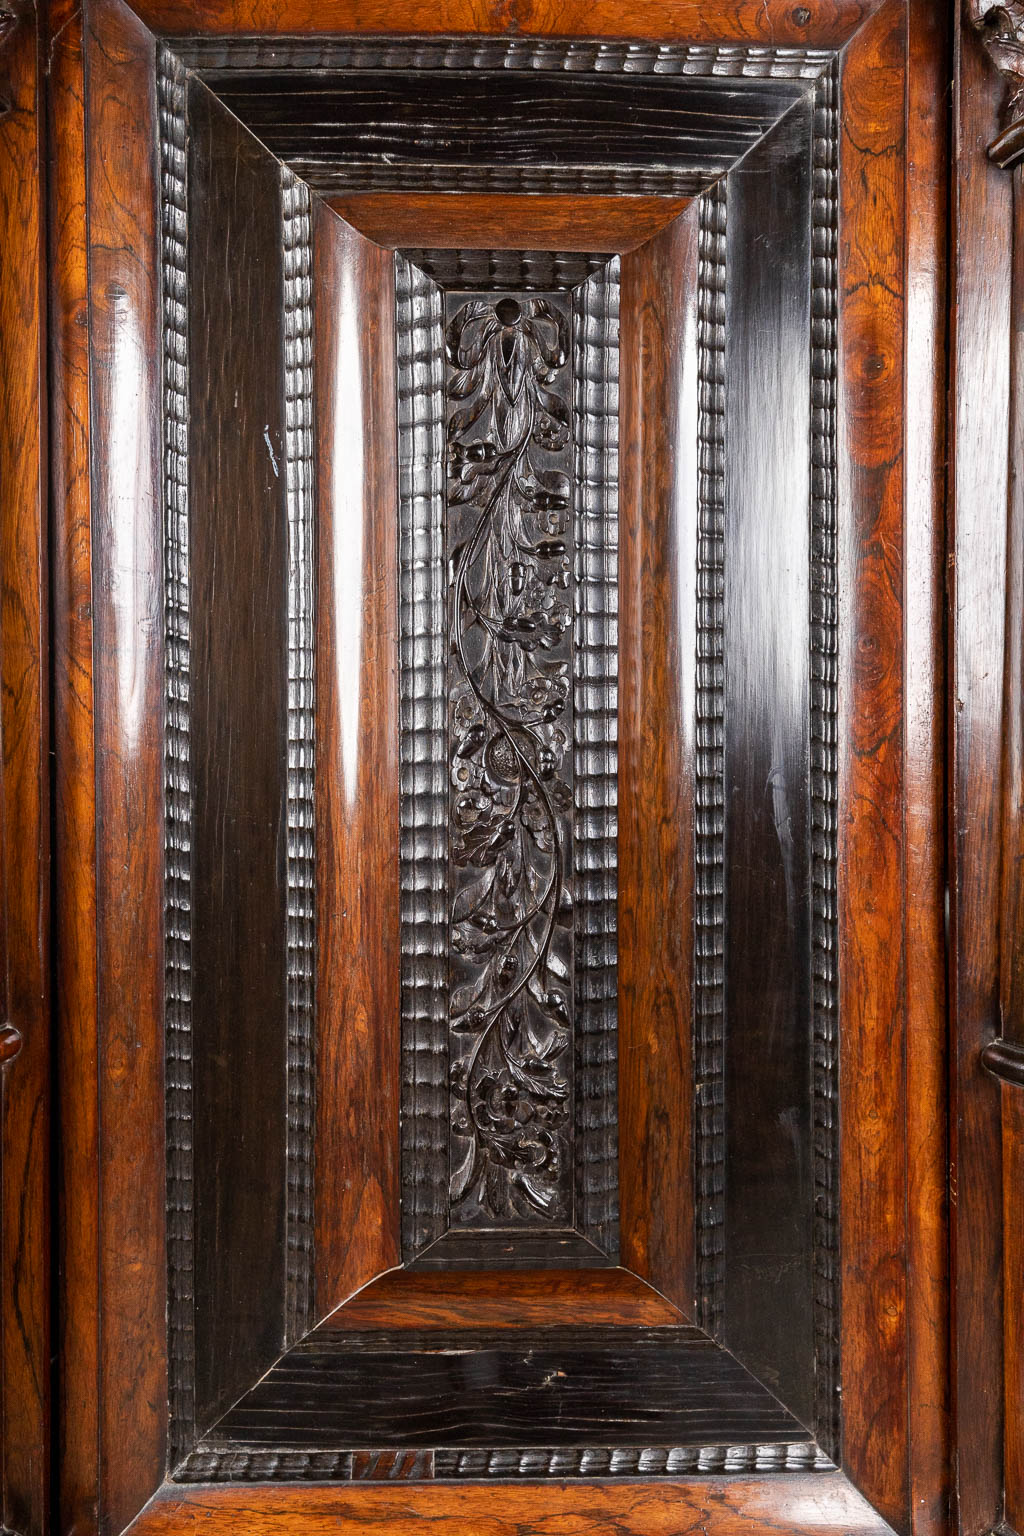 A Dutch pillow cabinet, finished with angel wood sculptures, ebony and mahogany veneer. 18th century - Image 18 of 22